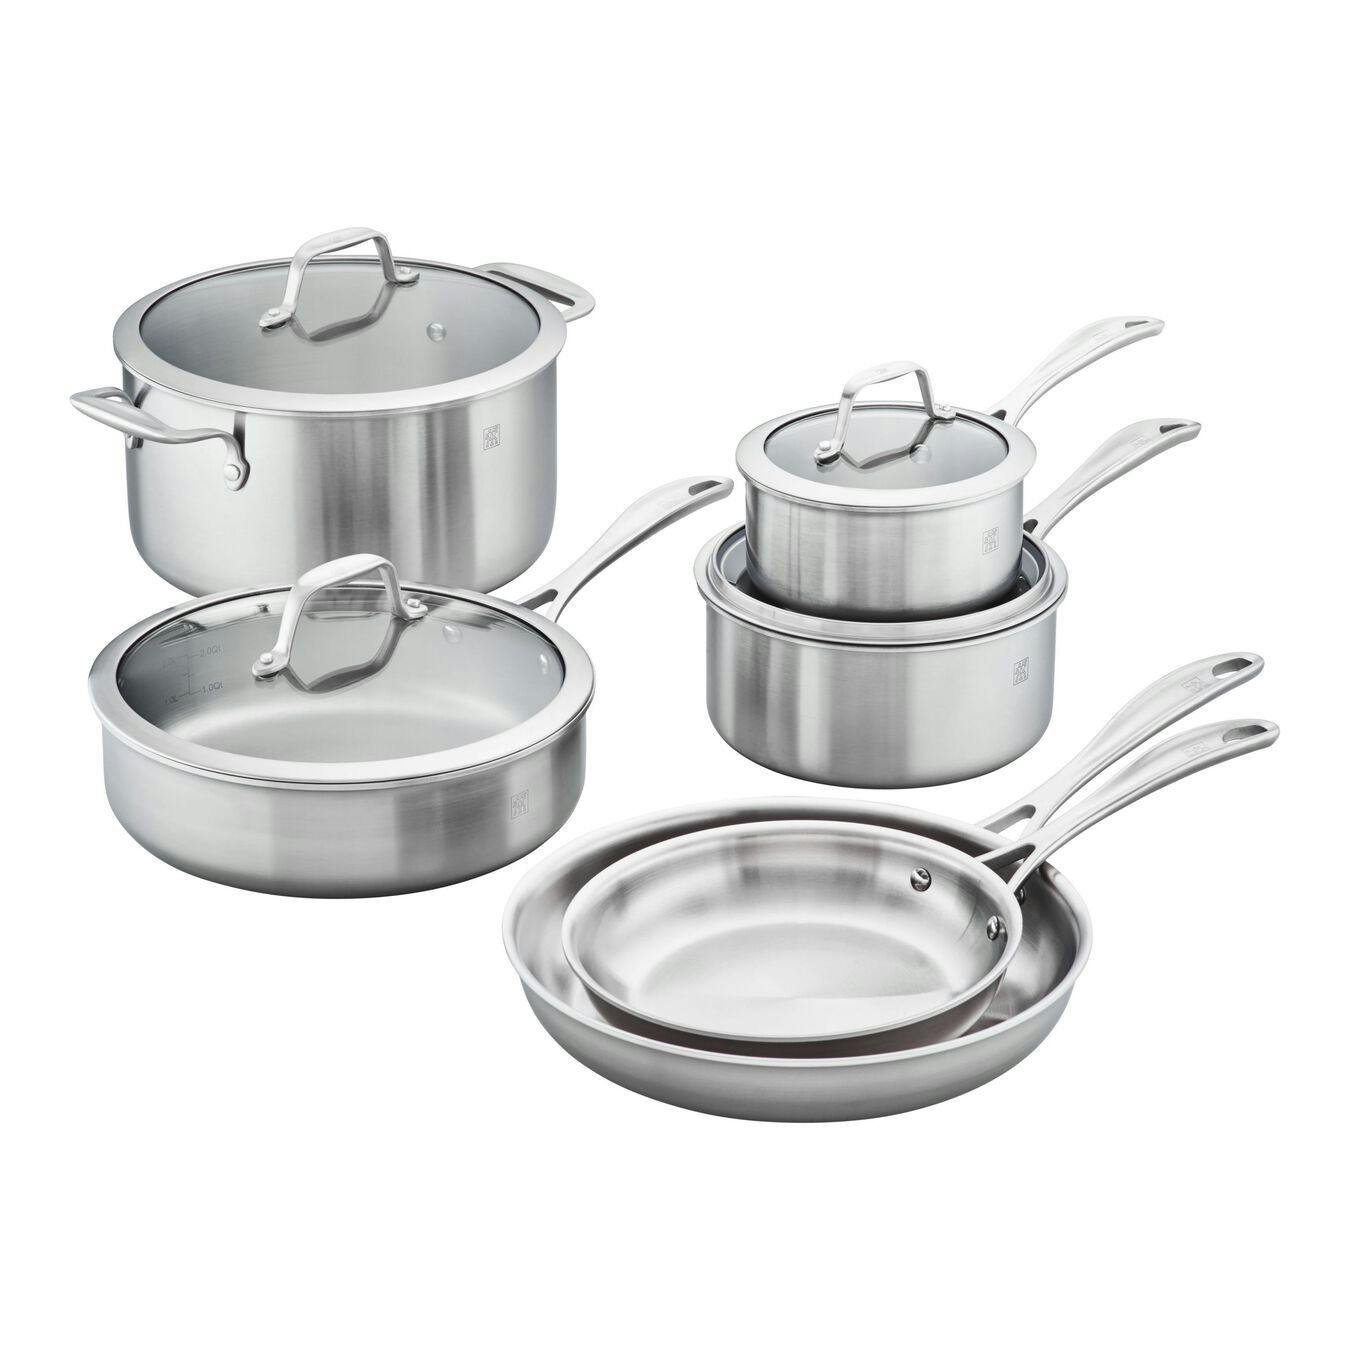 Zwilling Spirit 3-Ply 10-Pc Stainless Steel Cookware Set